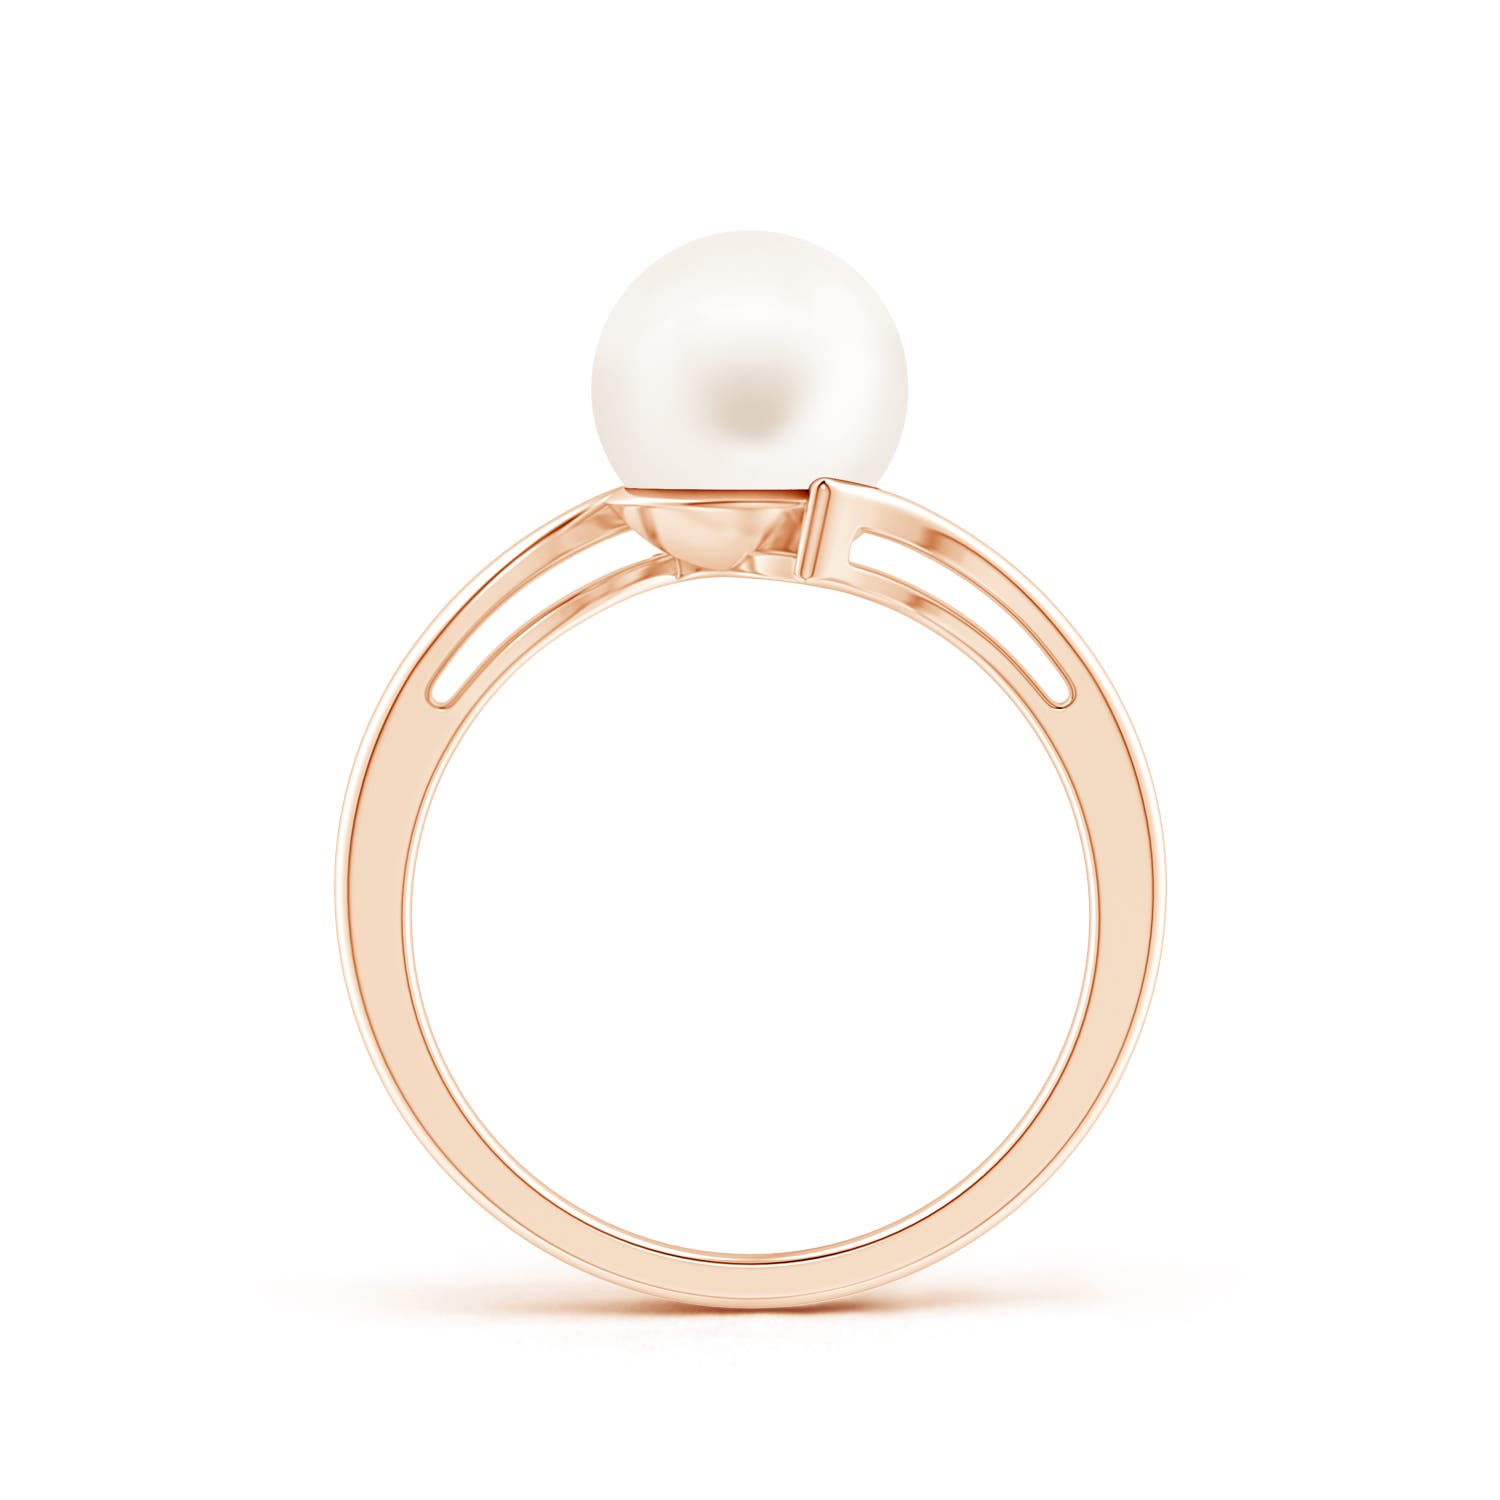 AA / 3.7 CT / 14 KT Rose Gold